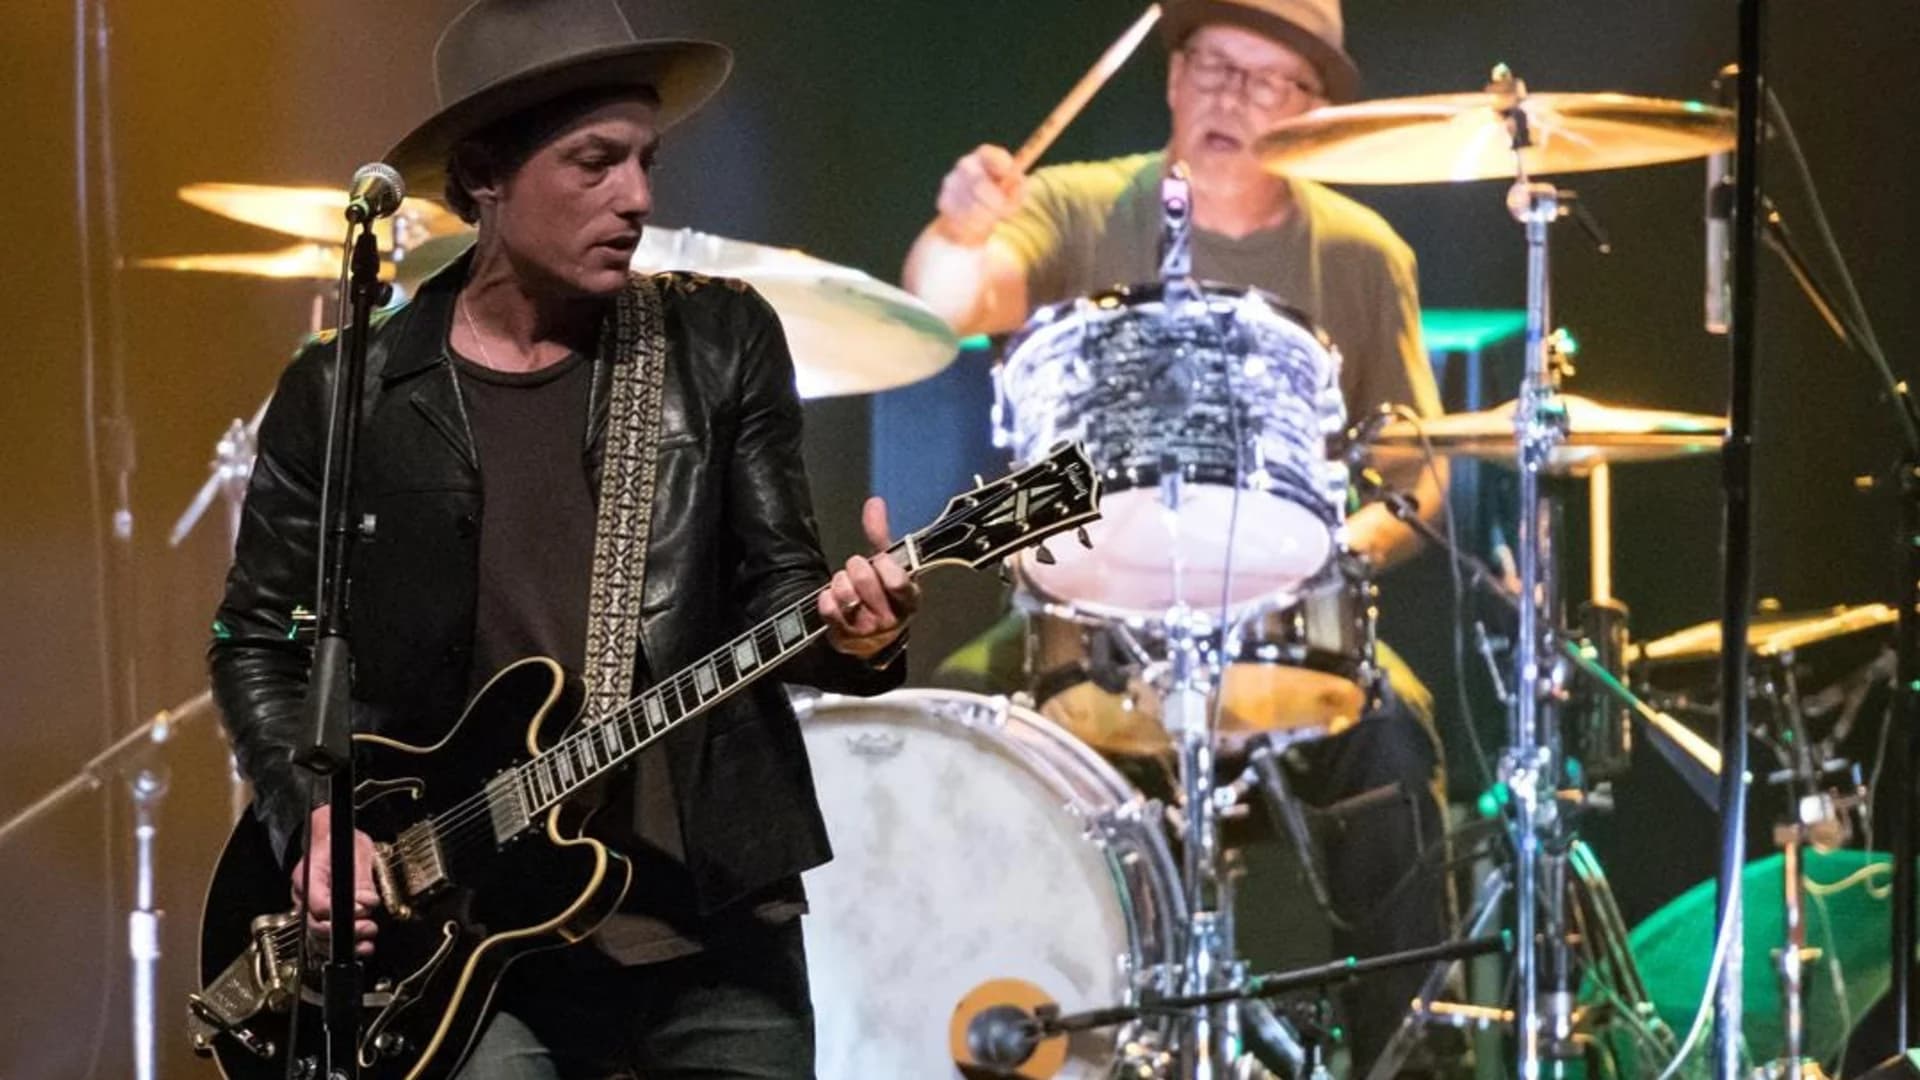 PHOTOS: The Wallflowers at The Paramount, 7/11